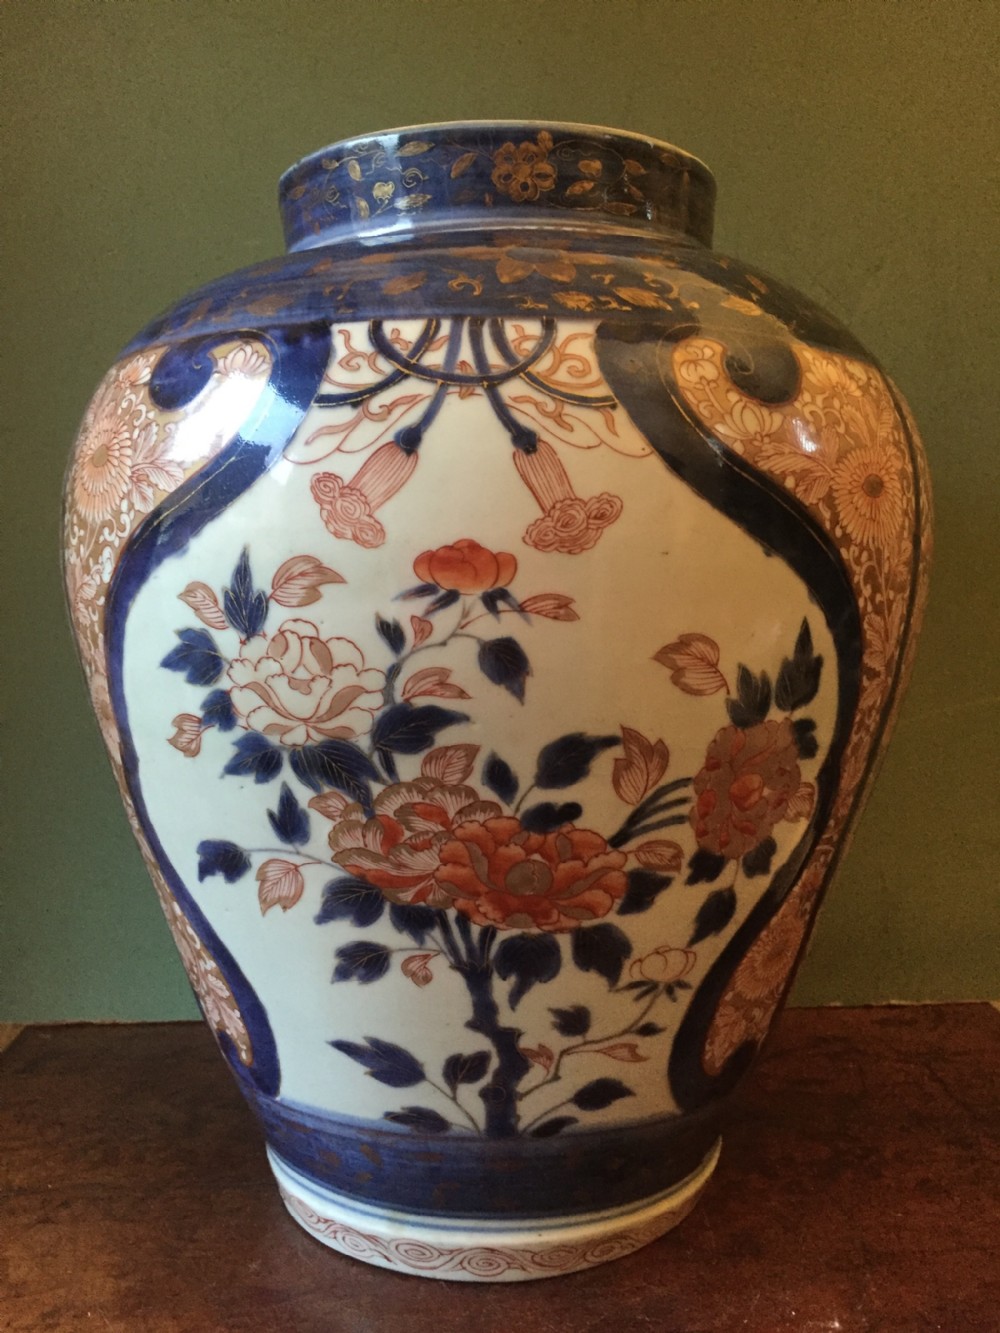 late c17th early c18th japanese edo period porcelain vase decorated in the imari palette